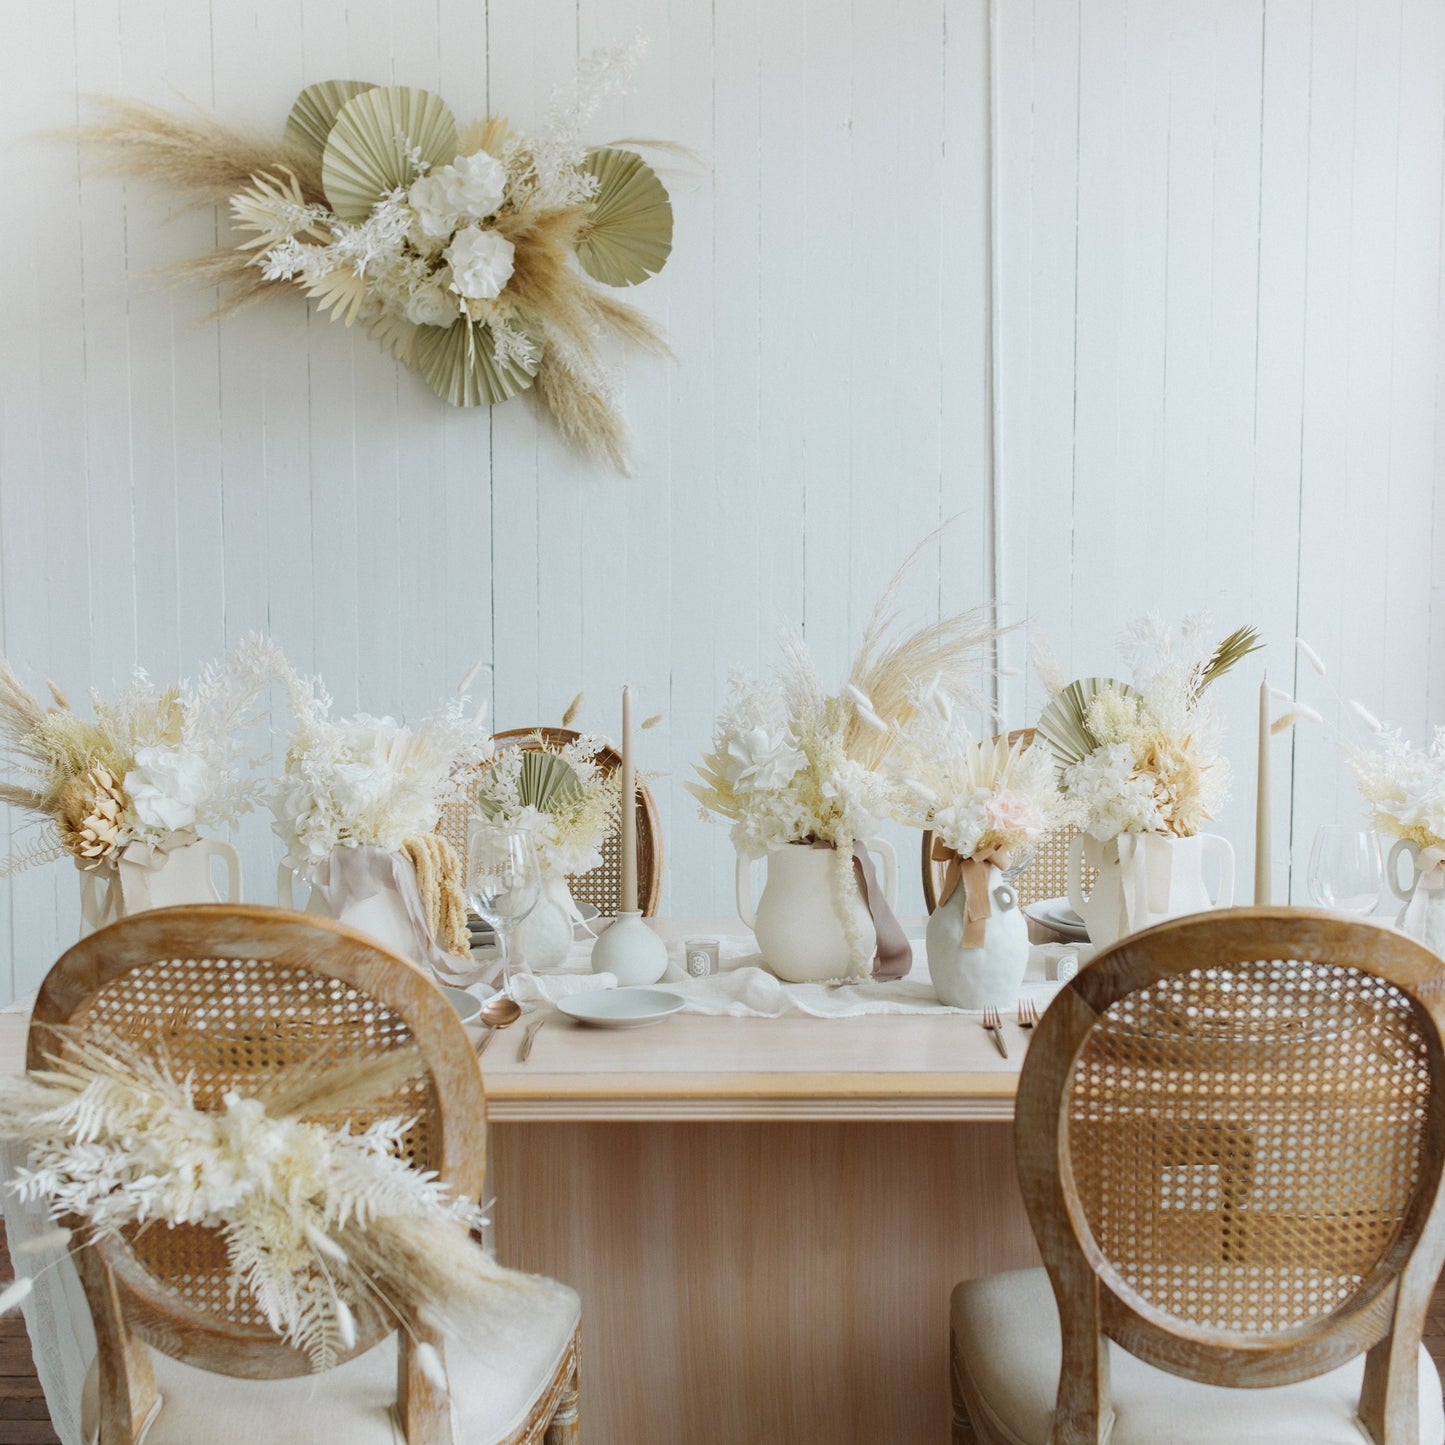 Large dried wedding floral installation available at Rook & Rose.